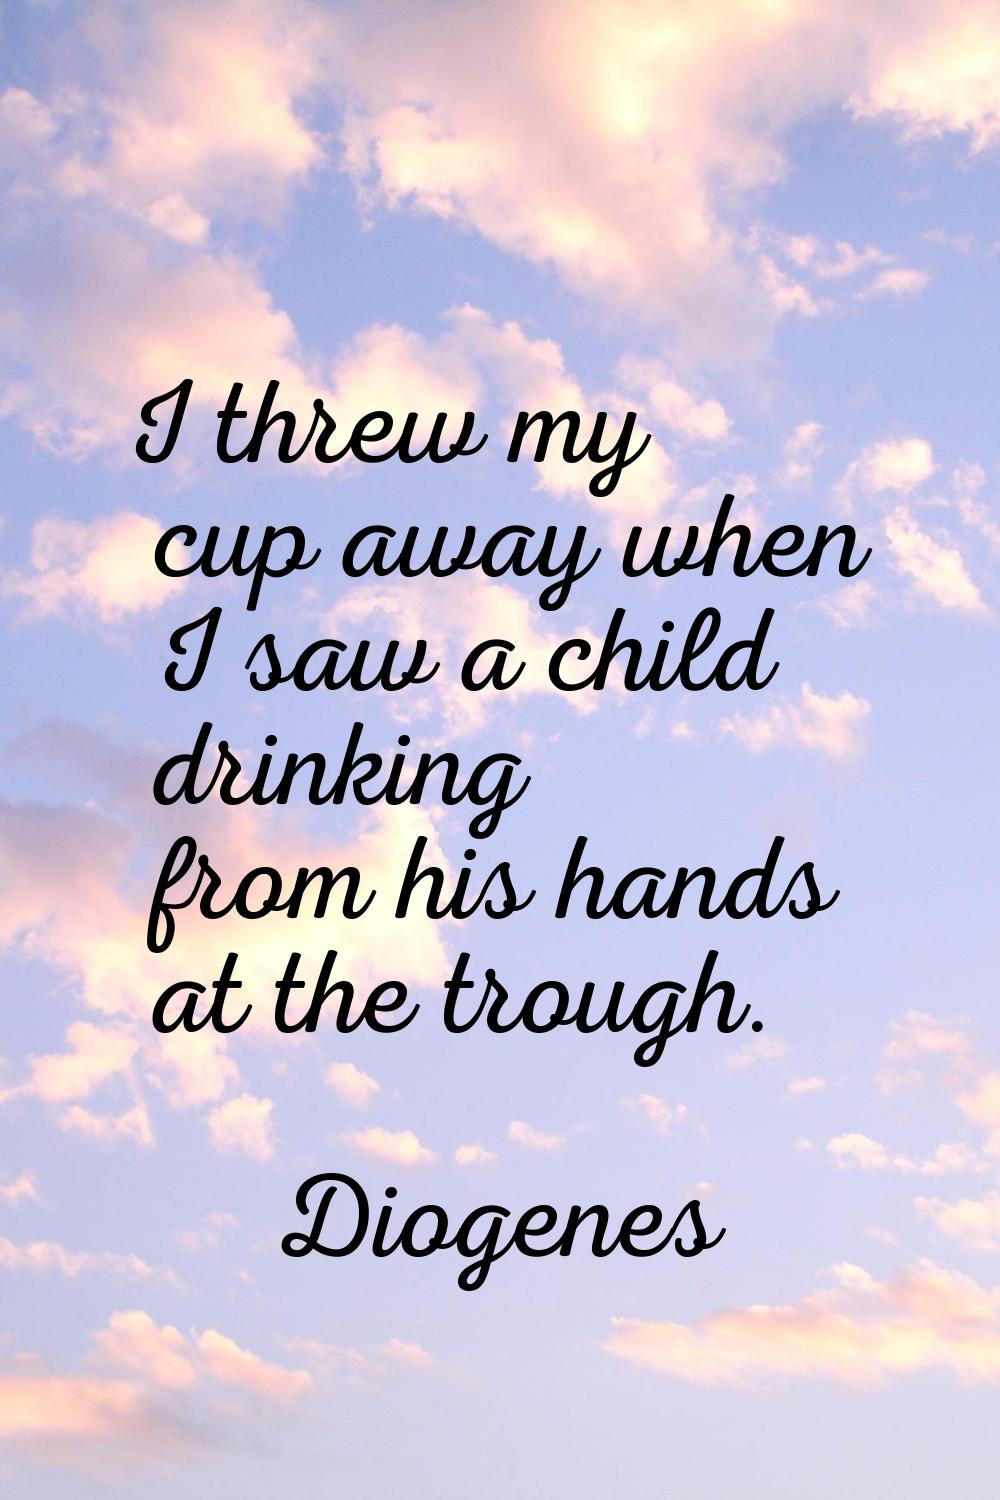 I threw my cup away when I saw a child drinking from his hands at the trough.